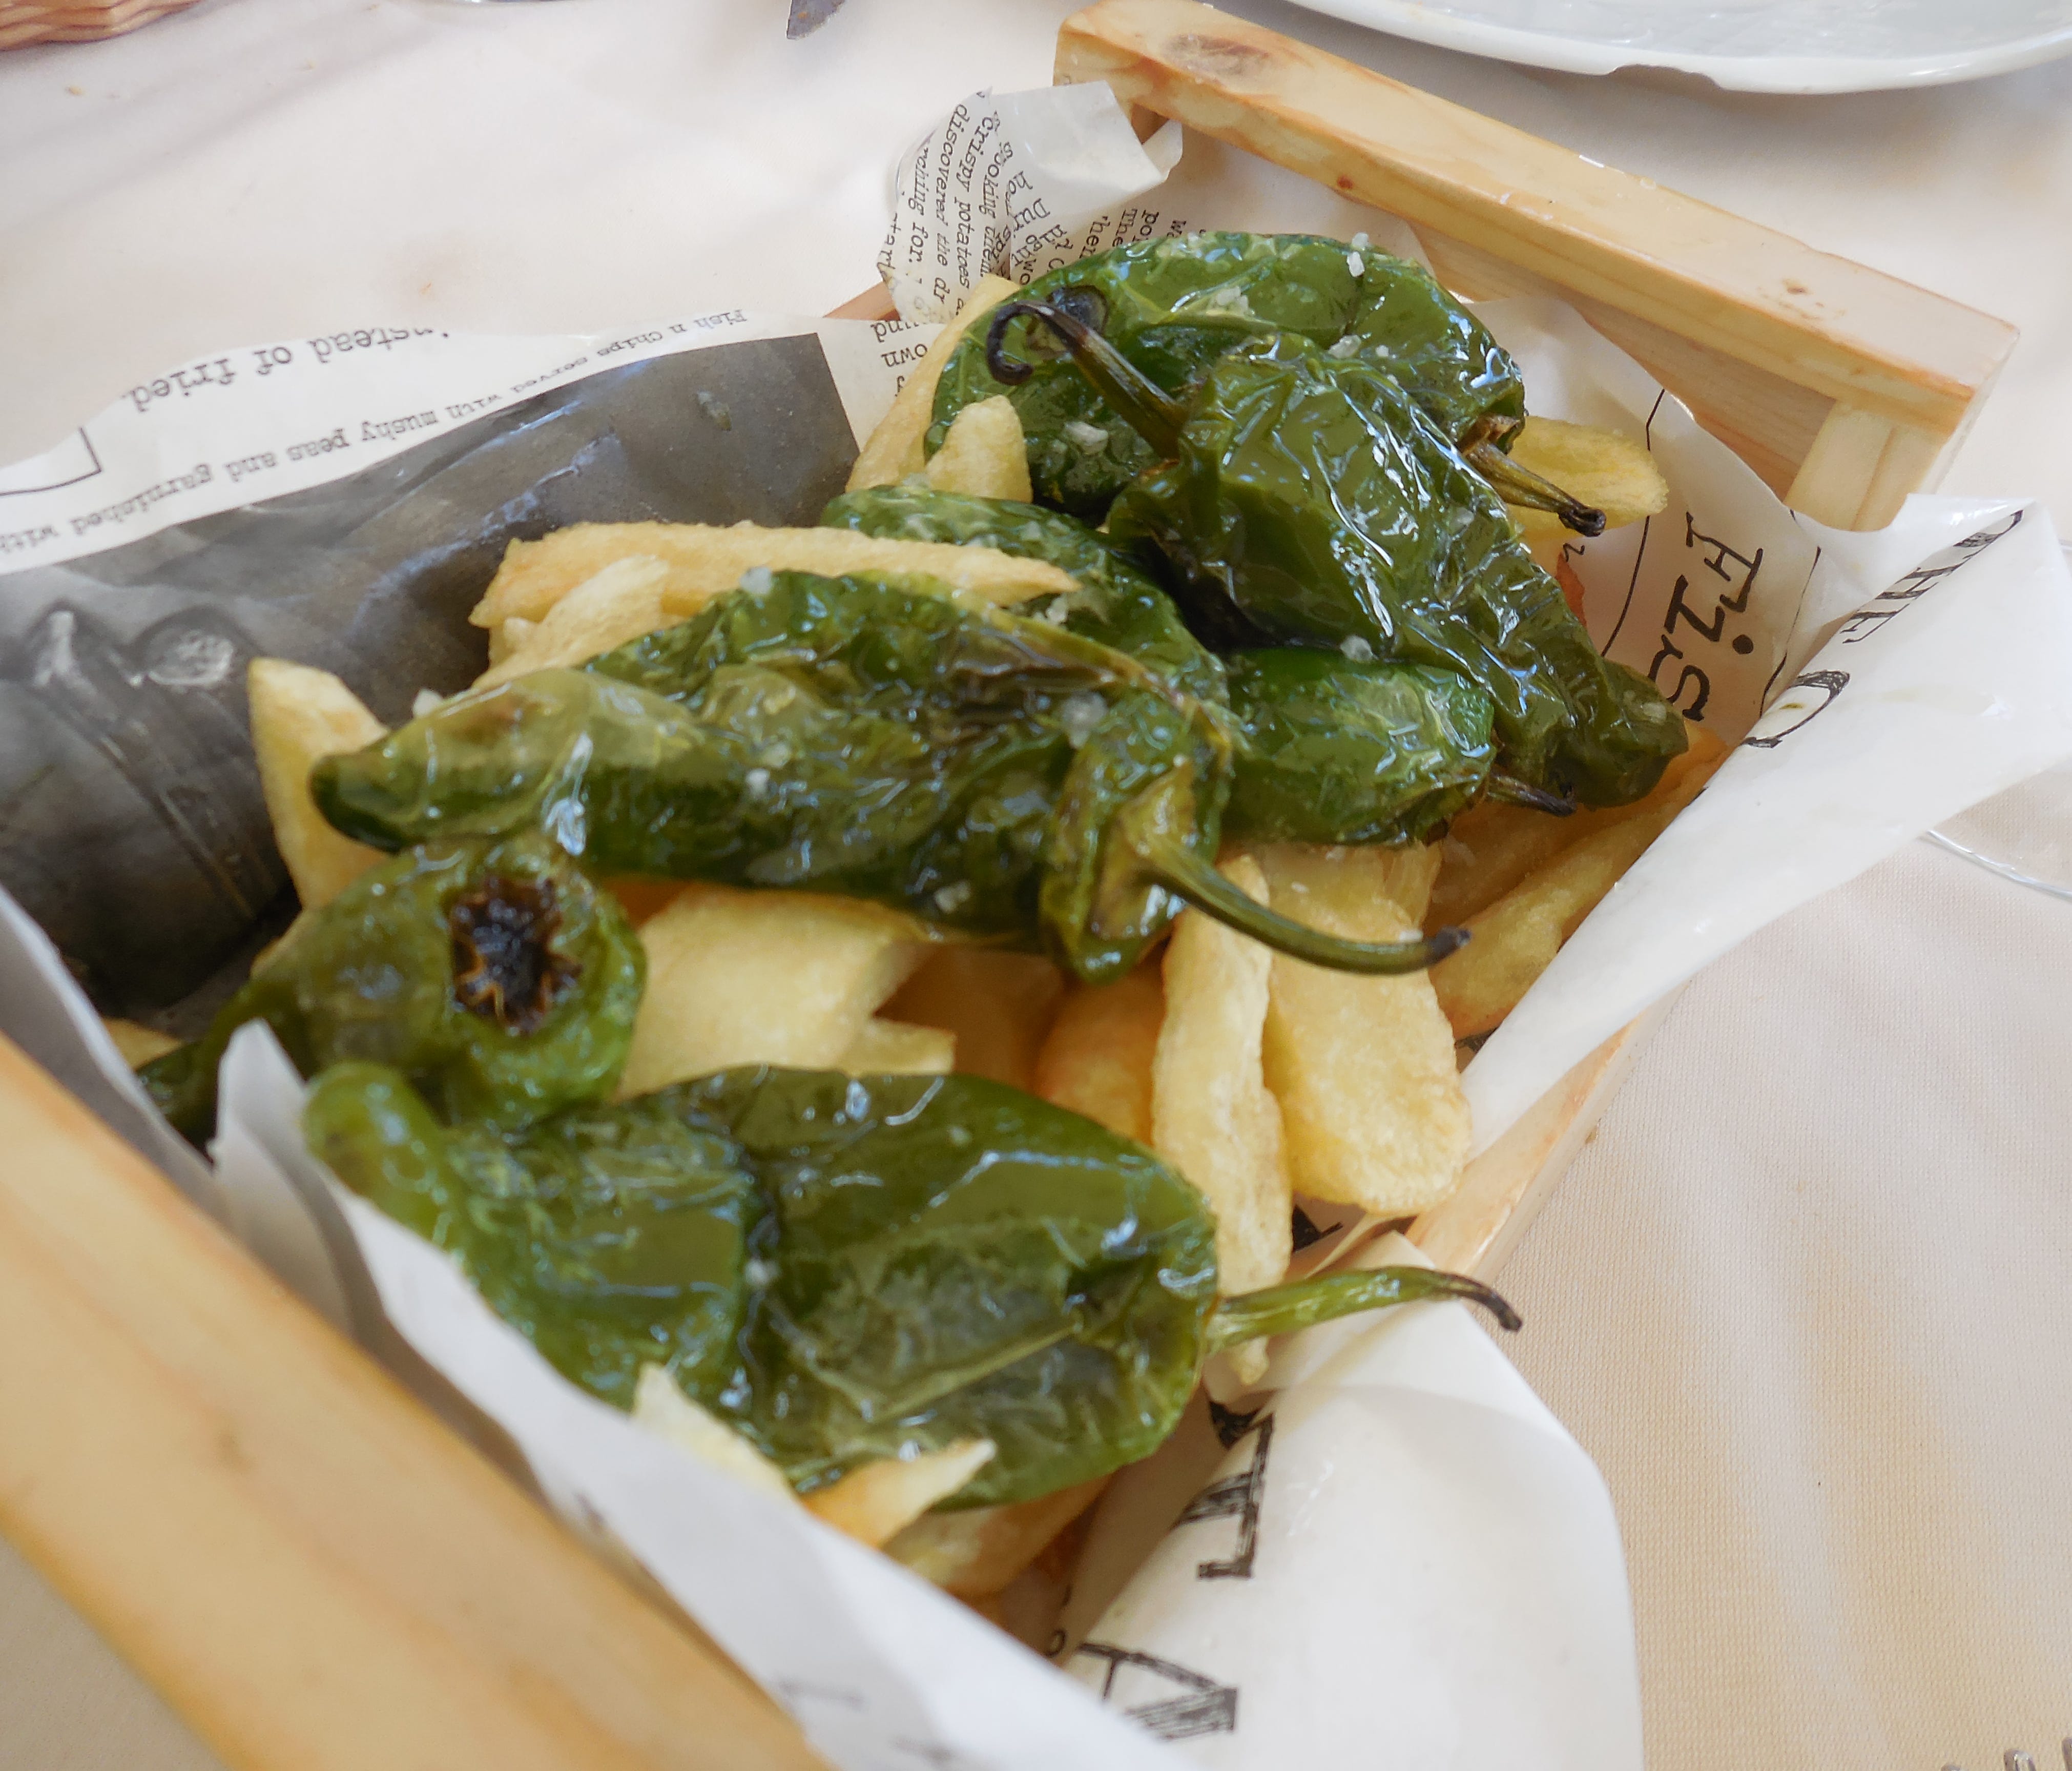 Rioja is known for its vegetables, including peppers, artichokes, asparagus, beans and peas. Blistered green peppers can be found at restaurants and tapas bars throughout Spain.